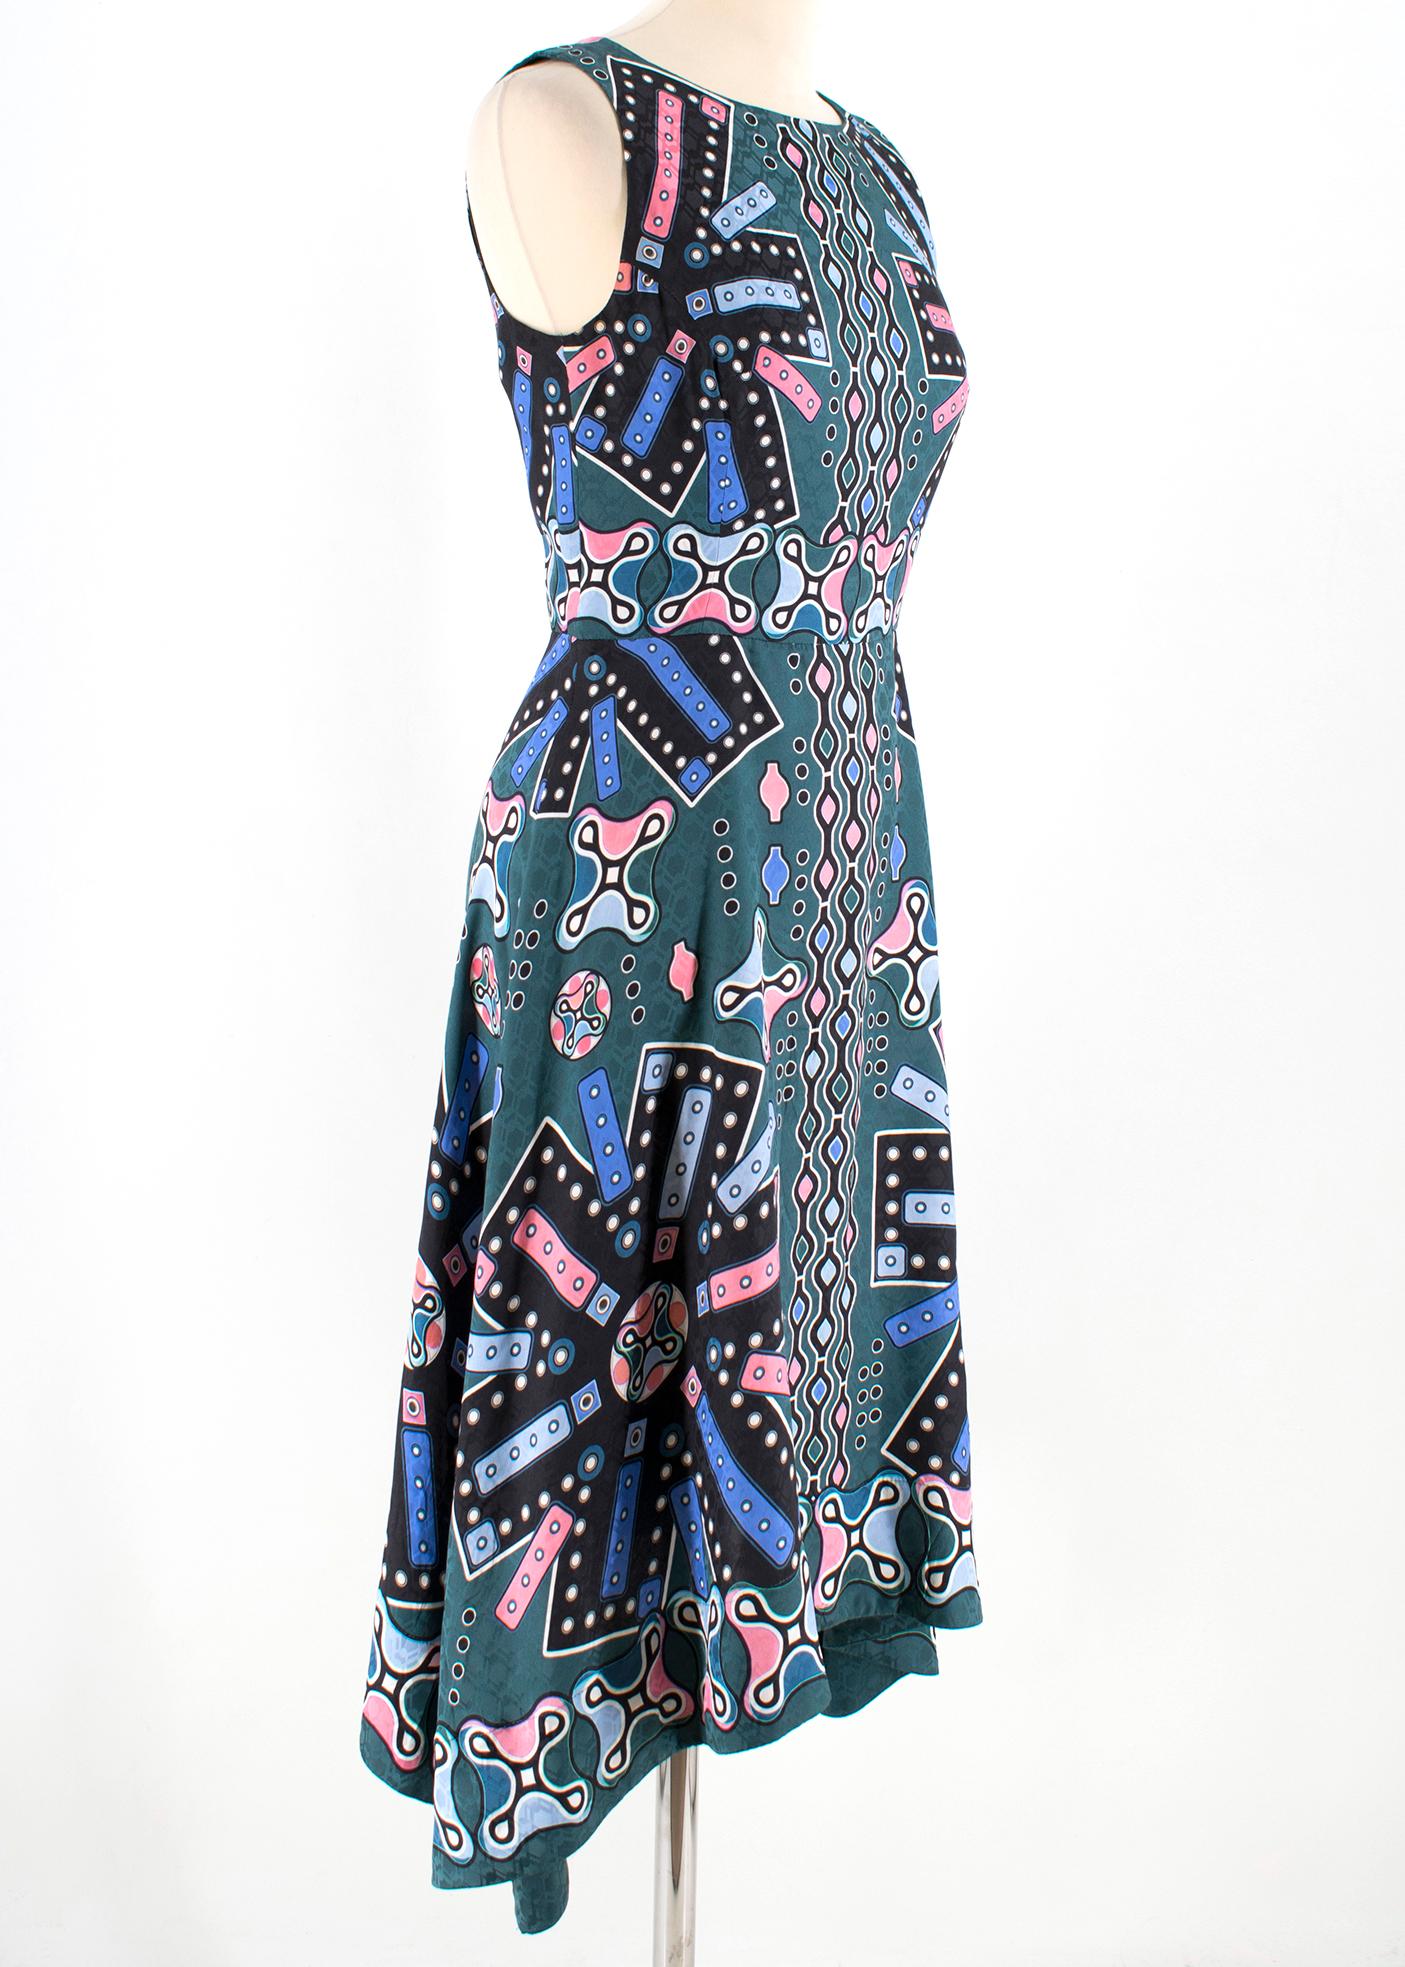 Peter Pilotto green printed silk sleeveless dress

- Green, pink and blue pattern silk mid length dress
- Sleeveless with round neckline
- Zip fastening at the back
- Lining material 56% acetate, 44% viscose 

Please note, these items are pre-owned